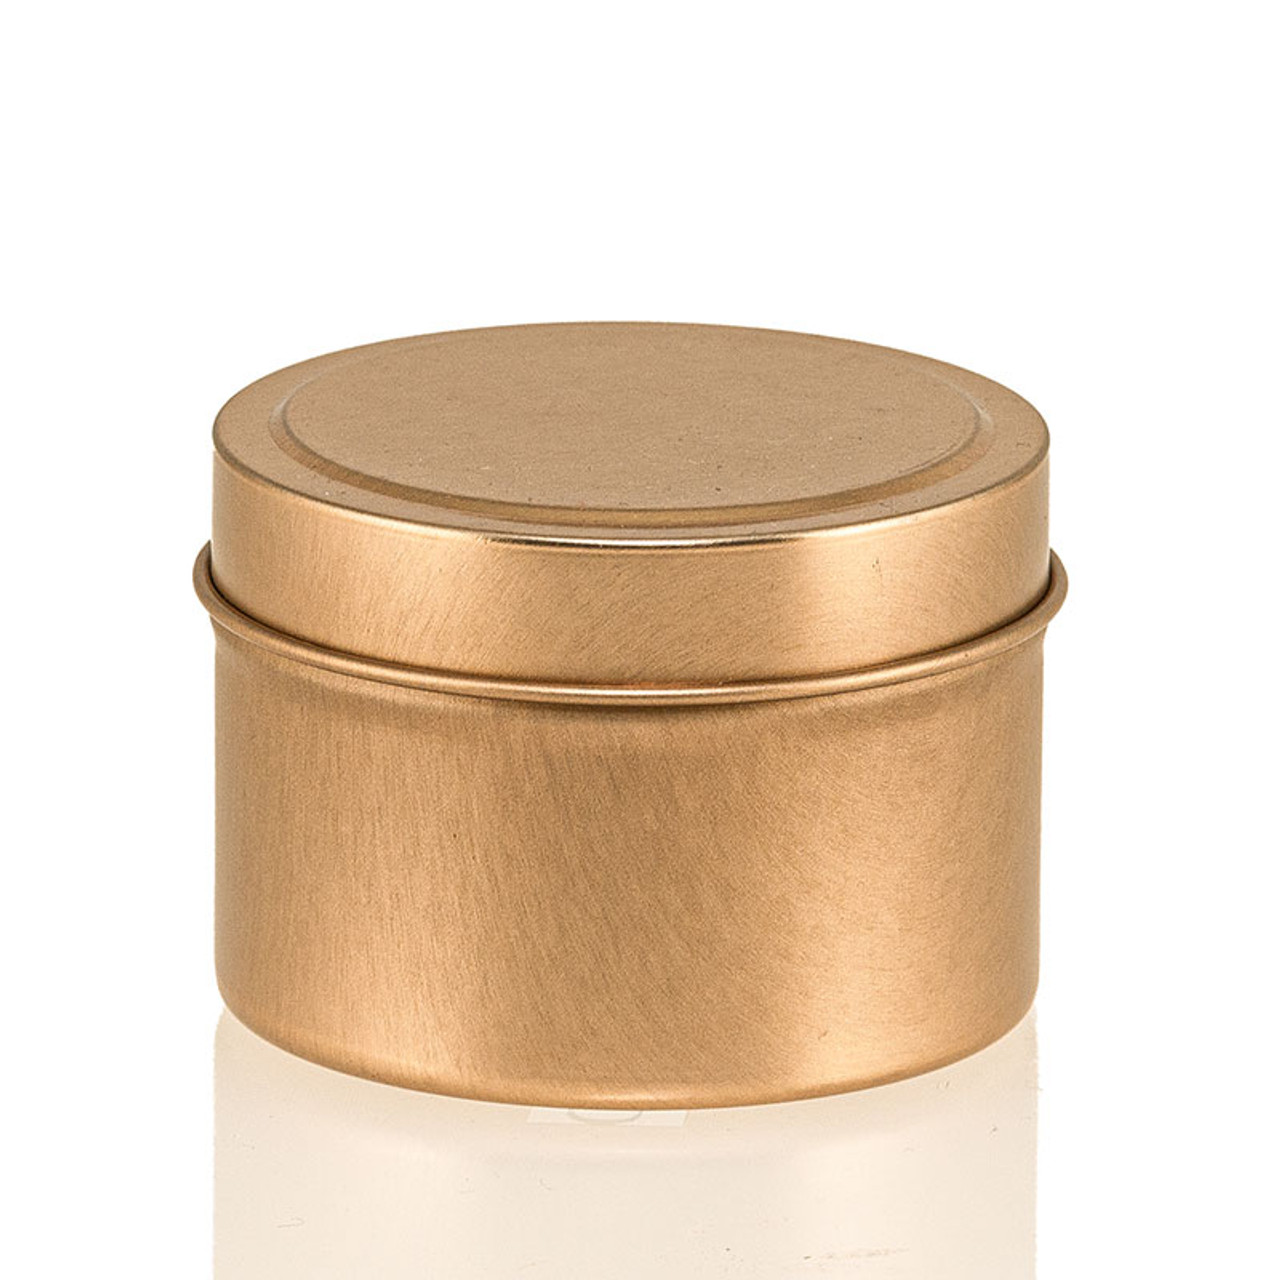 Wholesale High quality candle tins wholesale rose gold copper gold matte  black screw lid candle tins 4 oz ready to ship From m.